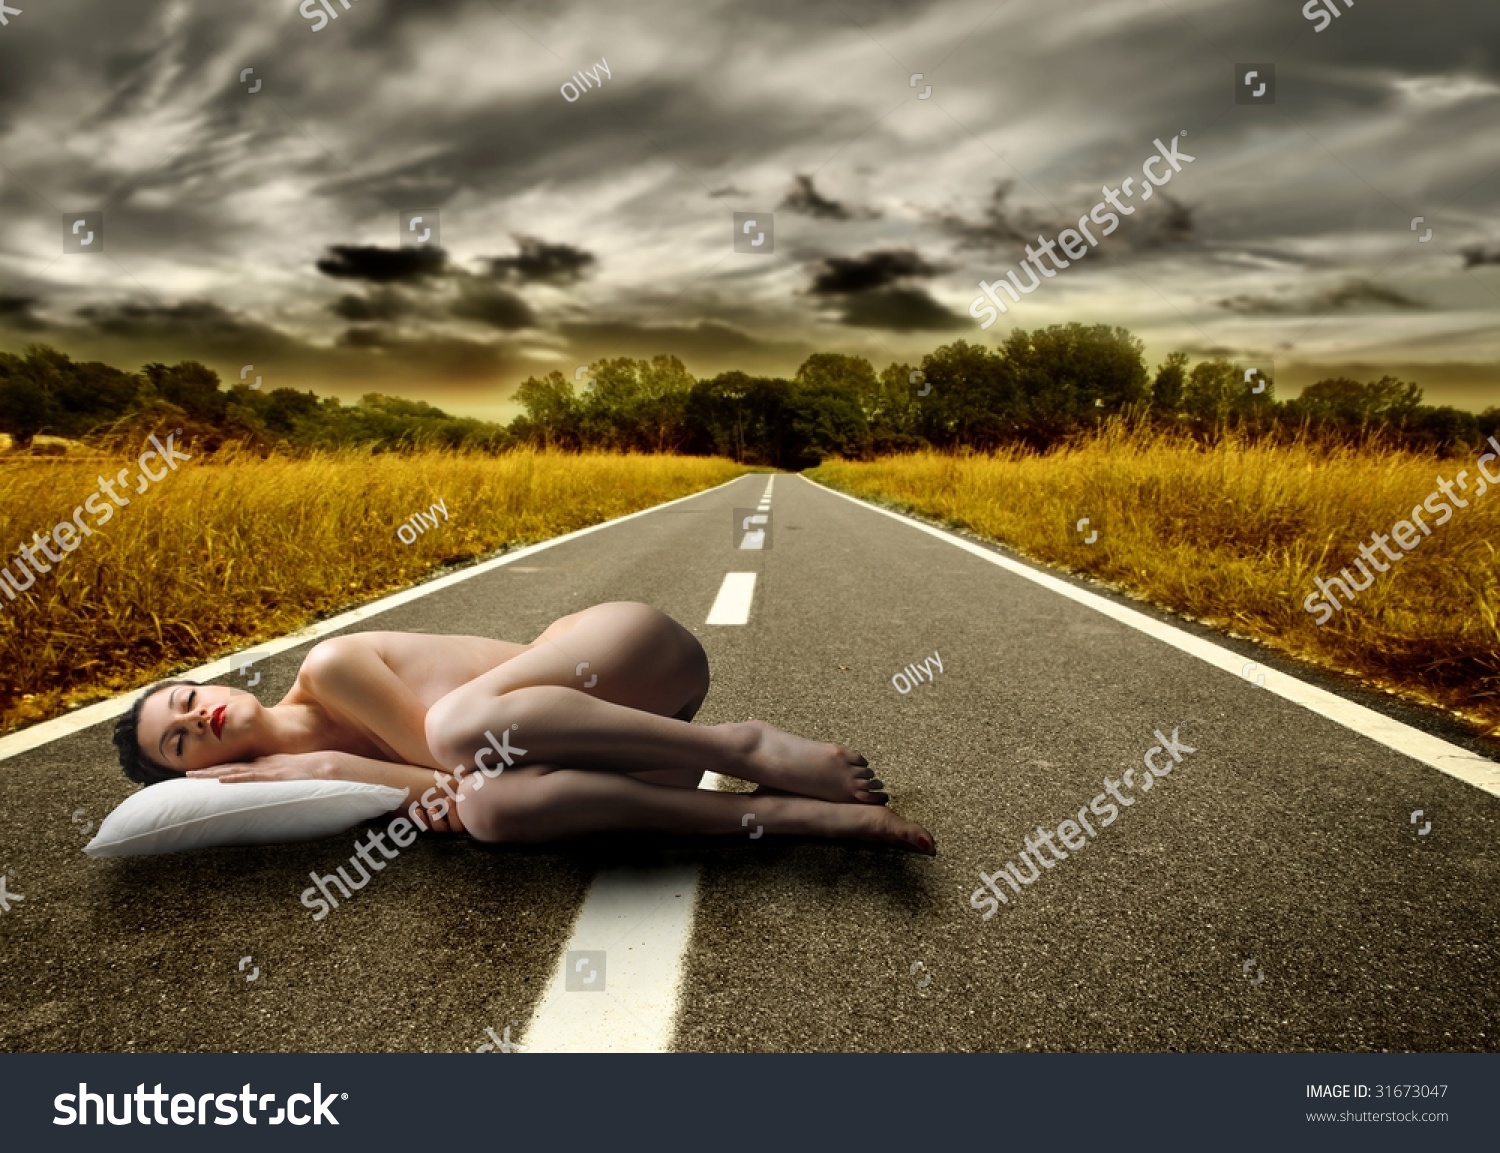 boy boy recommends nude on the road pic